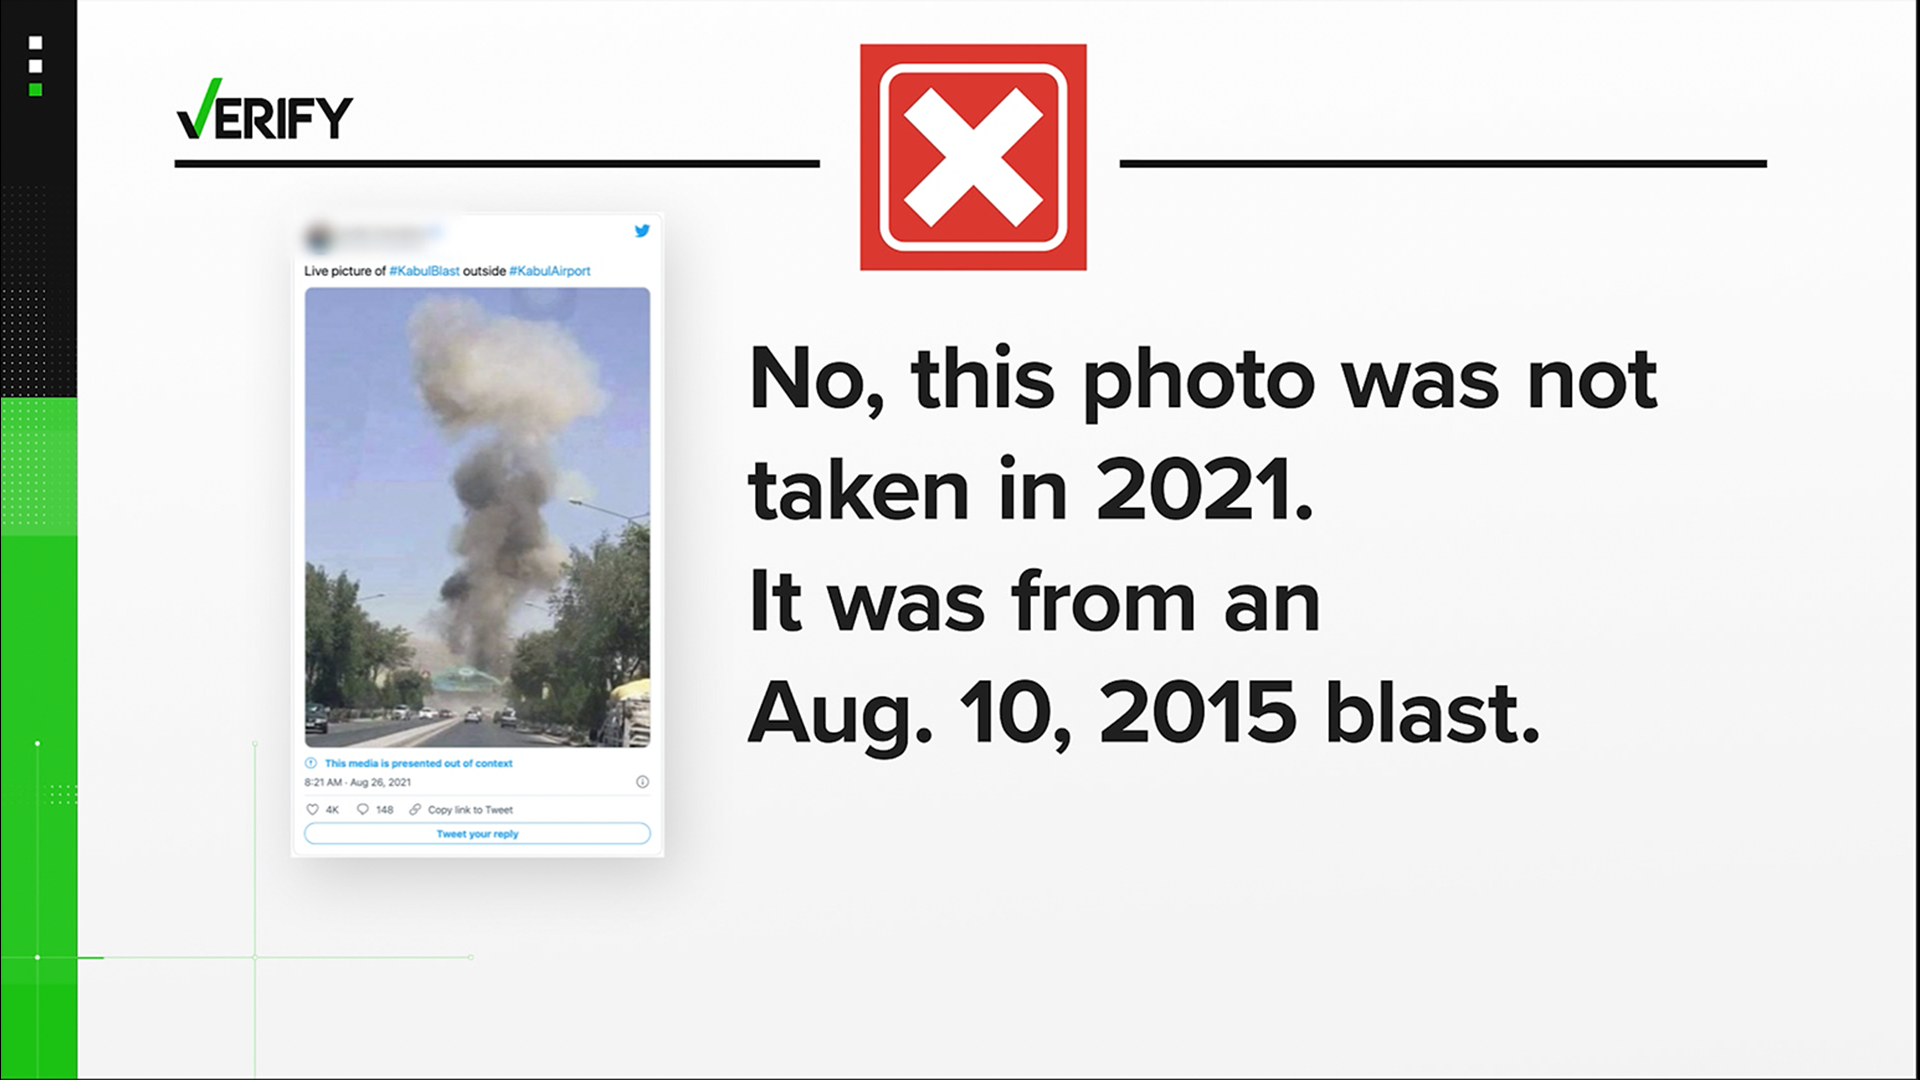 As part of VERIFY’s continued coverage of the Taliban takeover in Afghanistan, we researched additional posts claiming to be from the blast at the airport in Kabul.